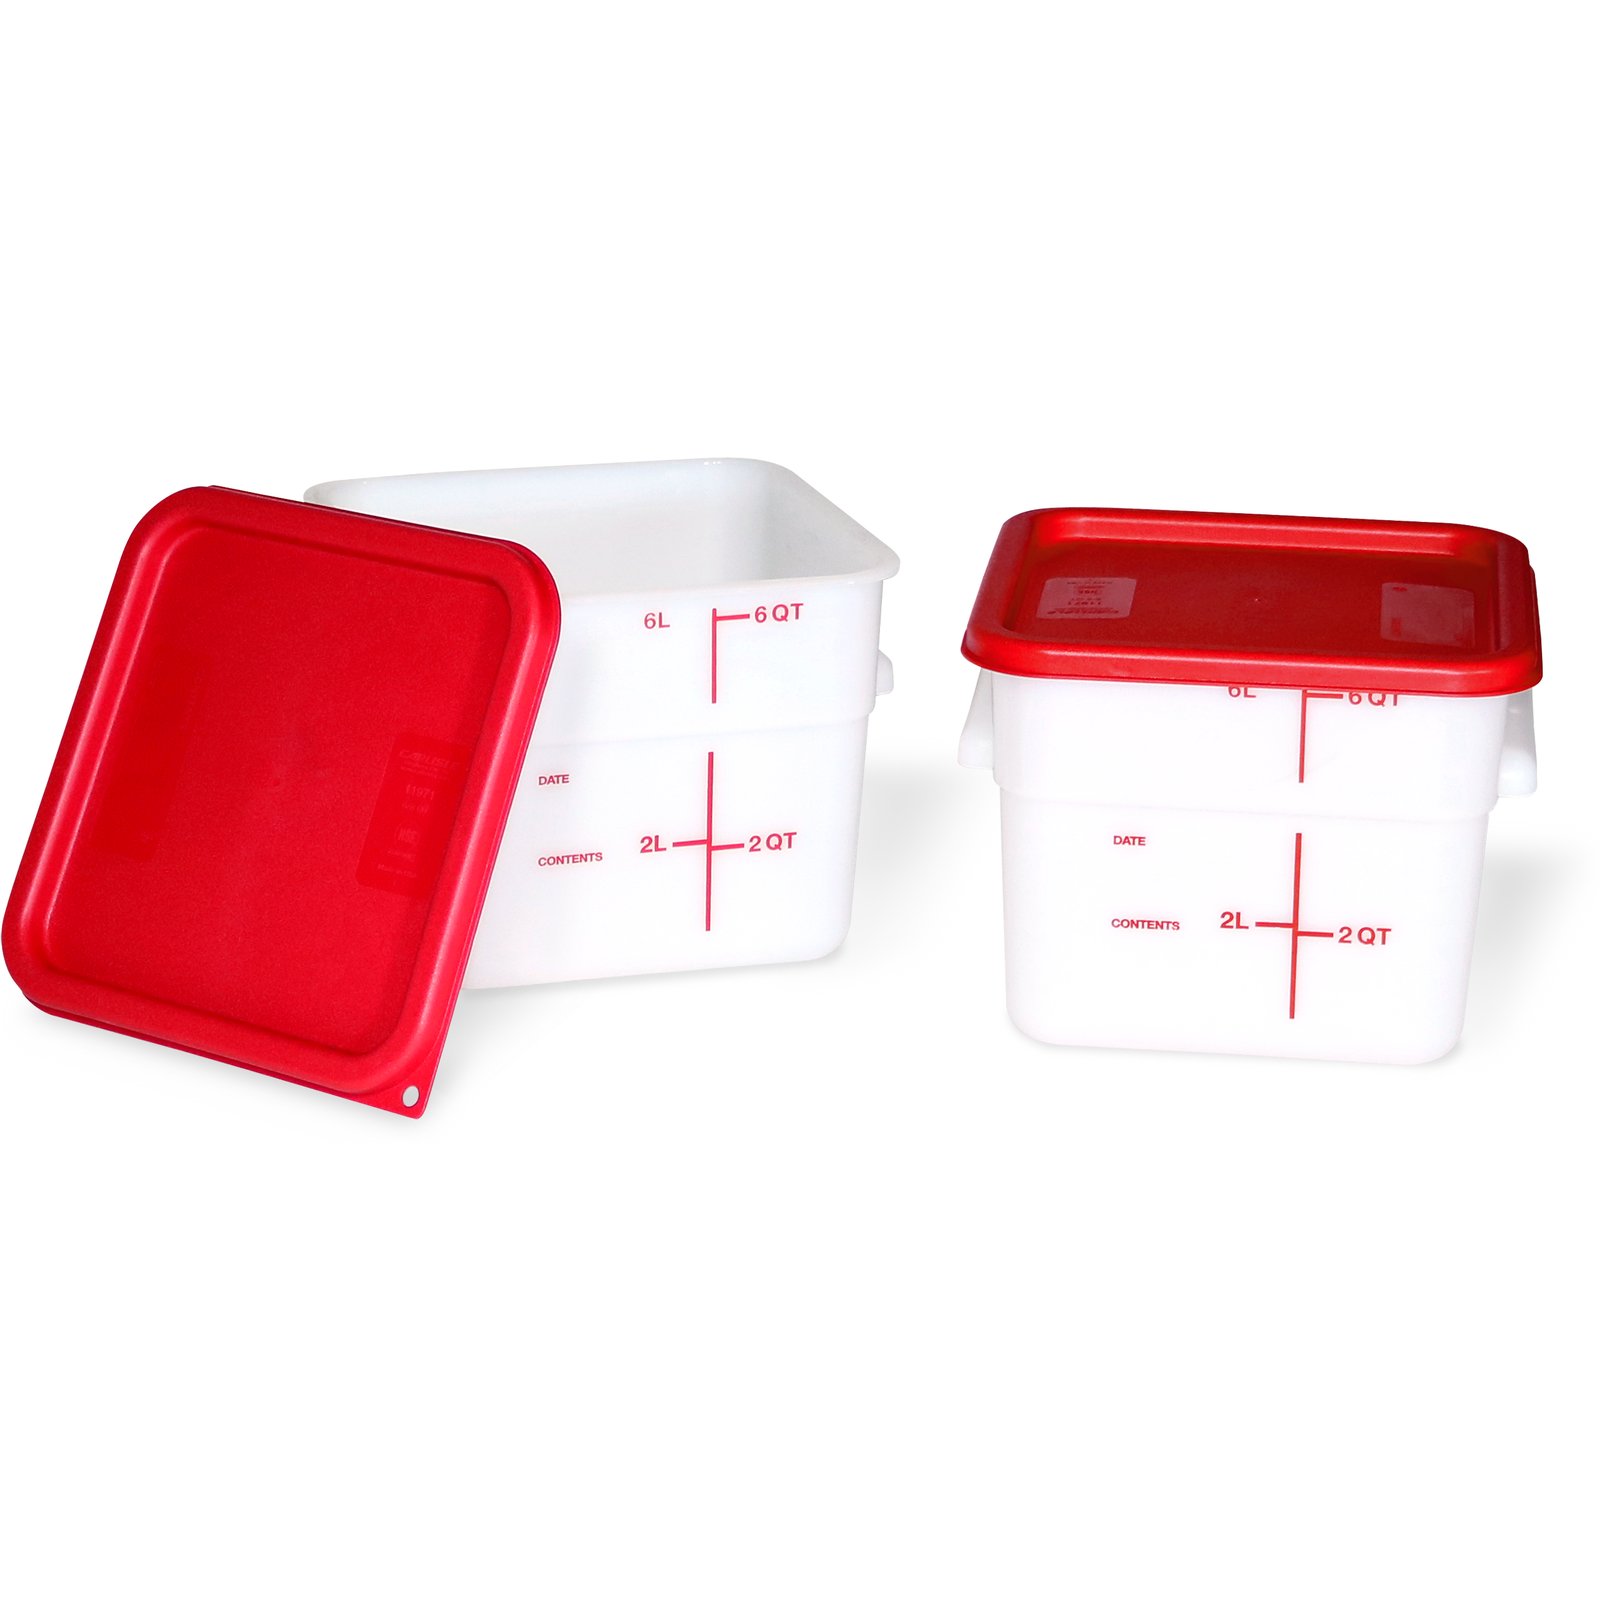 11962-202 - Squares Polyethylene Food Storage Containers & Lids